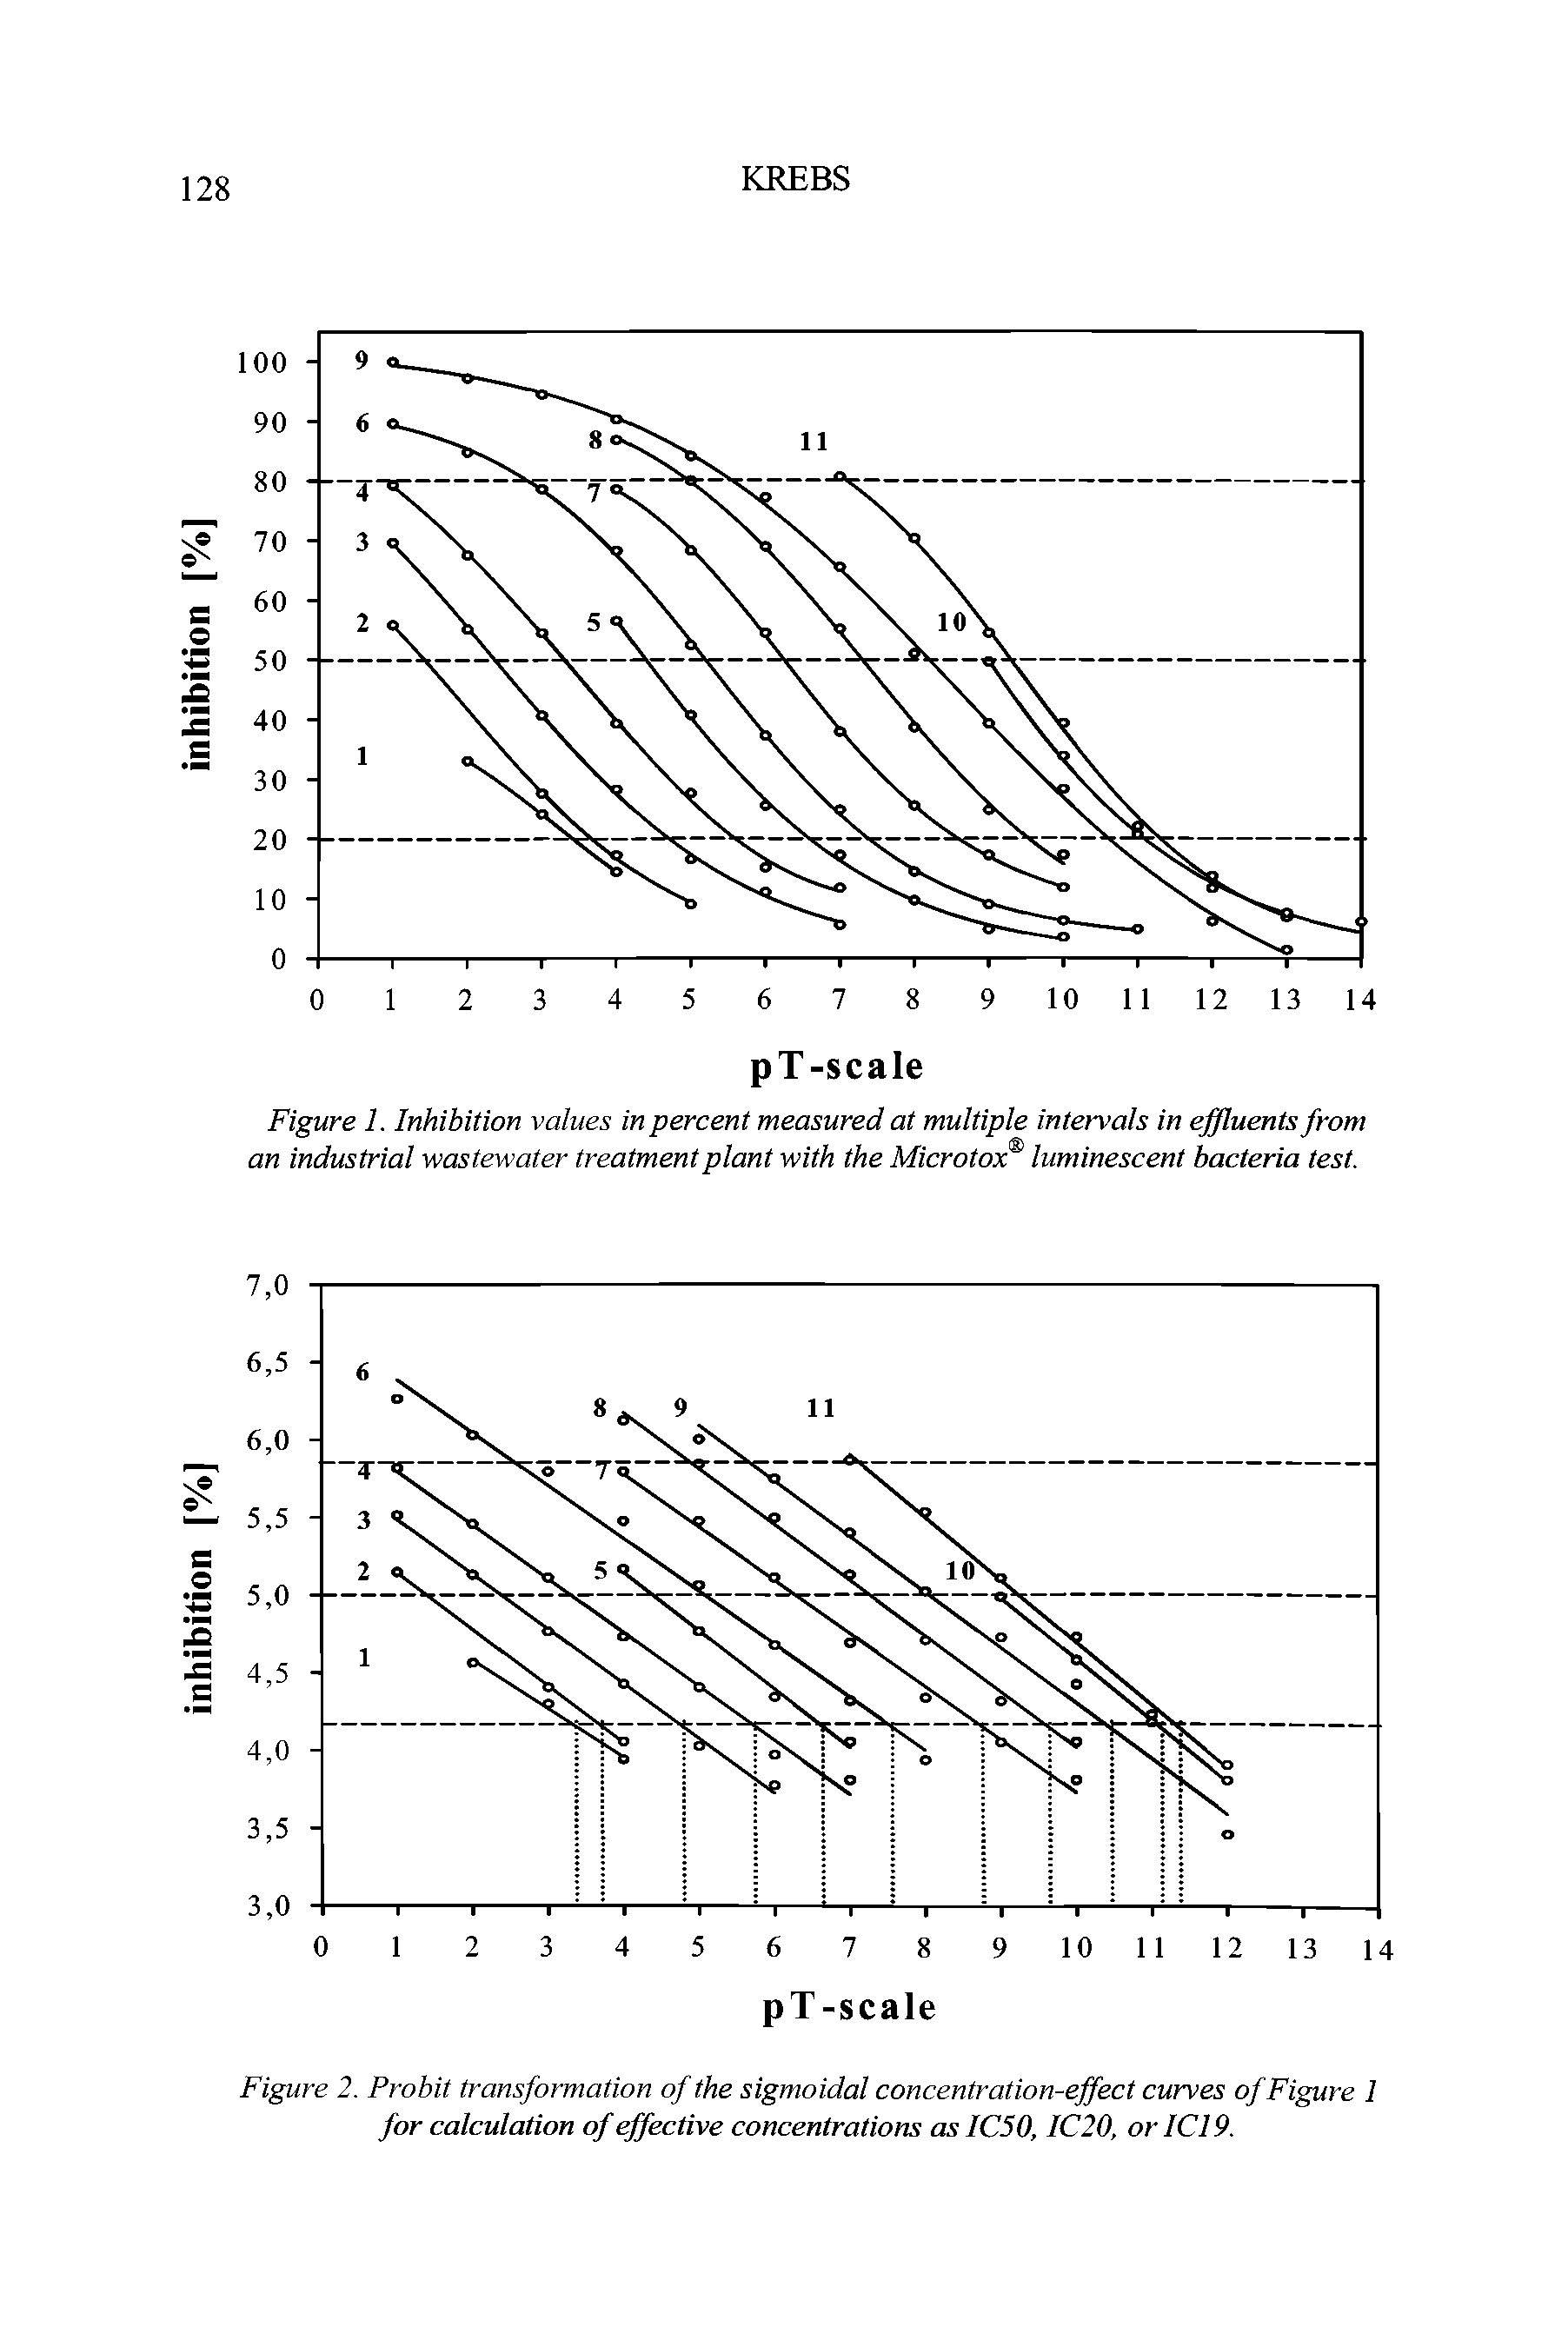 Figure 1. Inhibition values in percent measured at multiple intervals in effluents from an industrial wastewater treatment plant with the Microtox luminescent bacteria test.